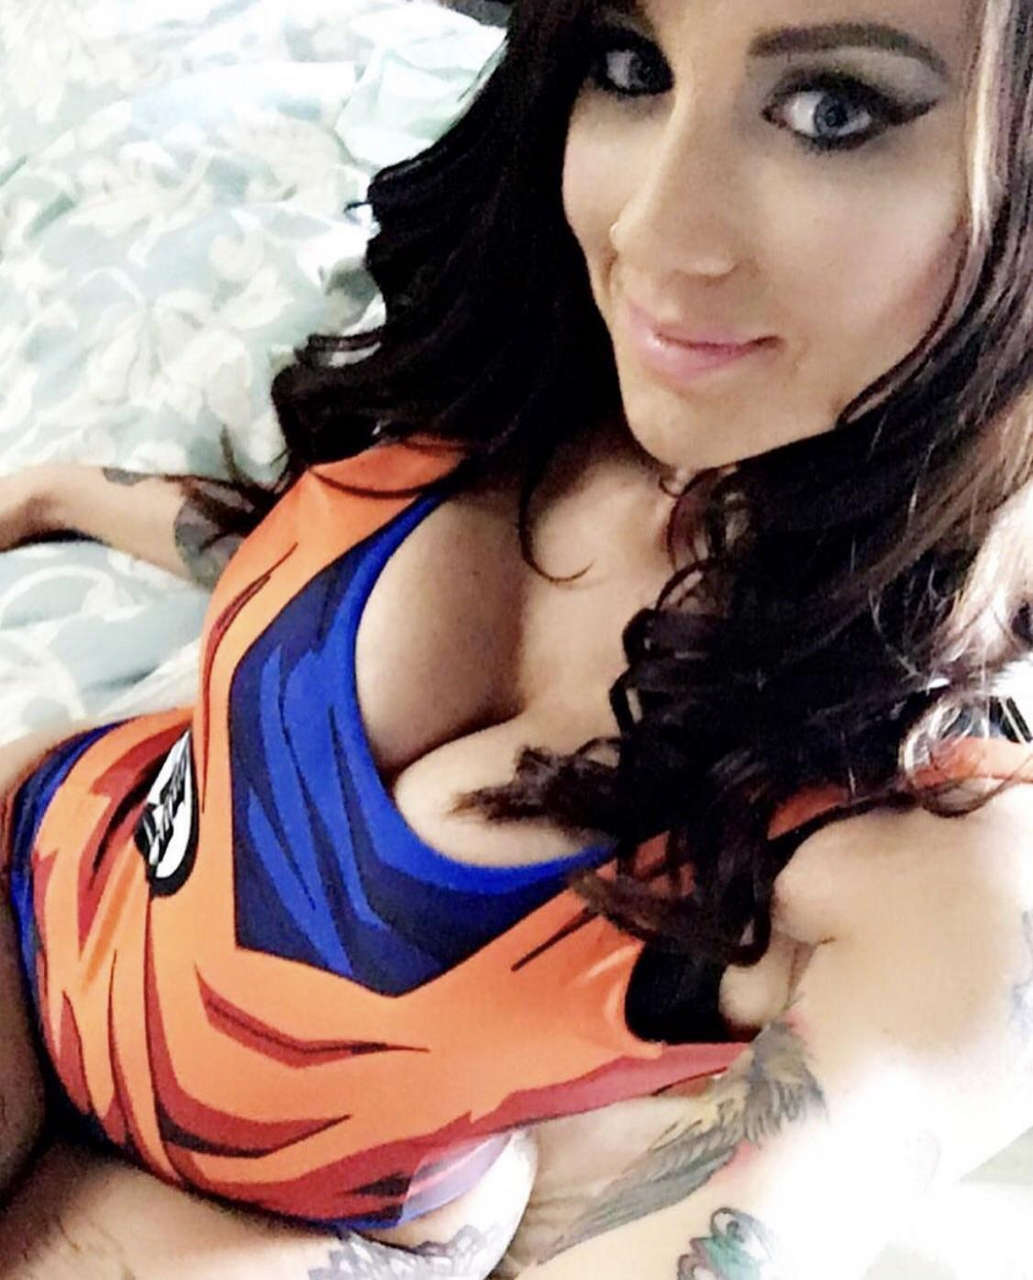 Boobs And Dbz 2 Of My Favourite Things Sadly I